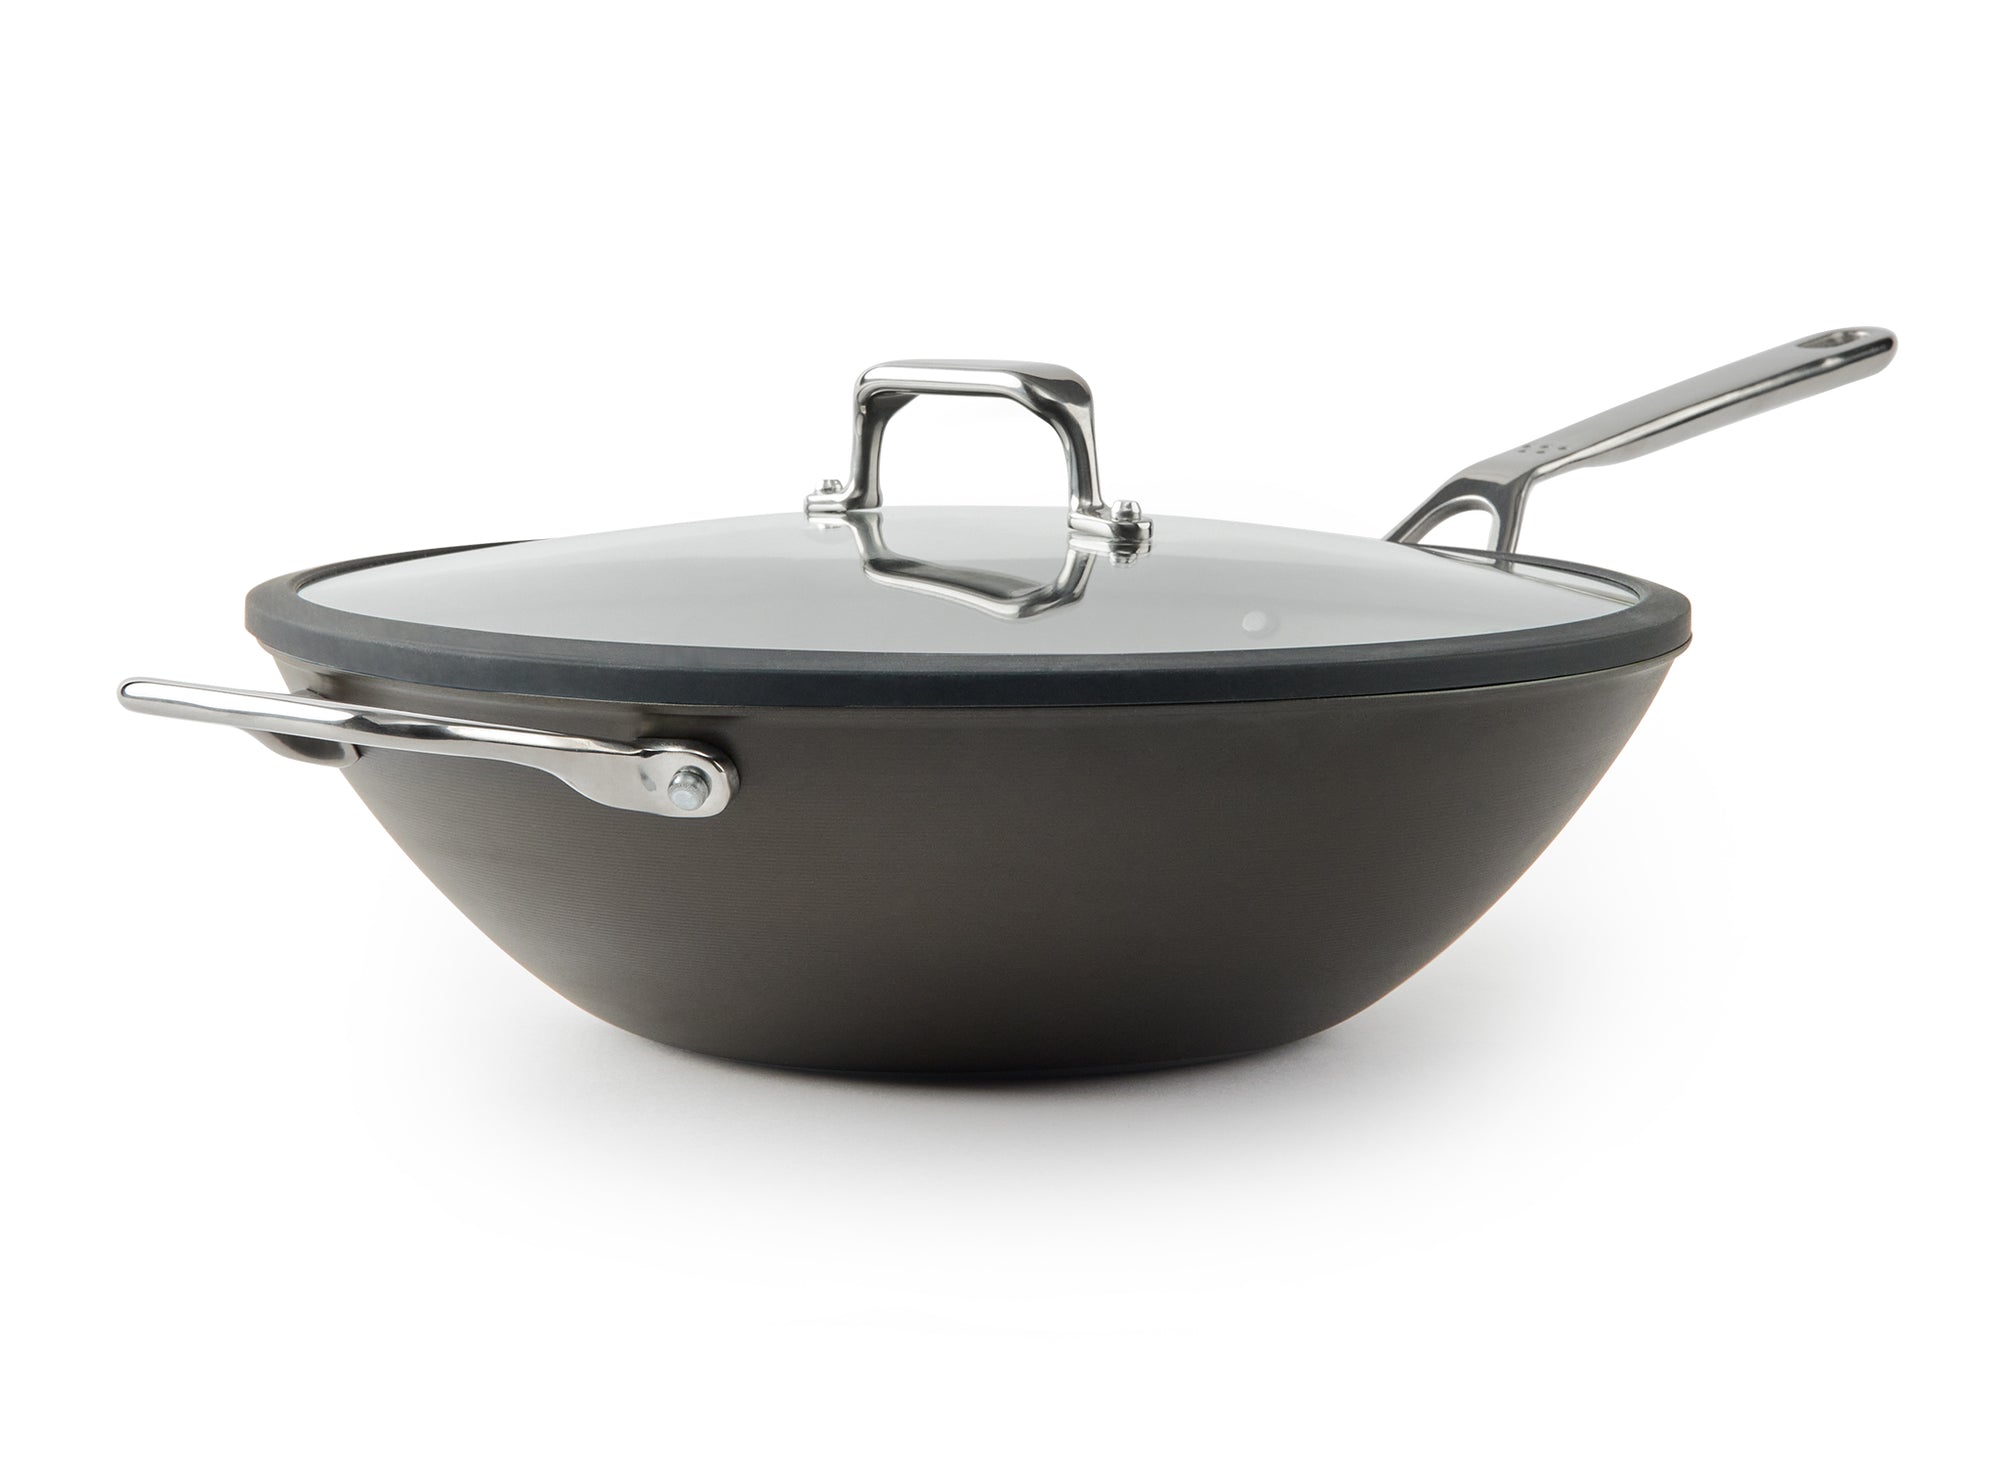 {{12-inch}} A front-facing view of the Misen Carbon Steel Wok with the glass lid on, on a white background.